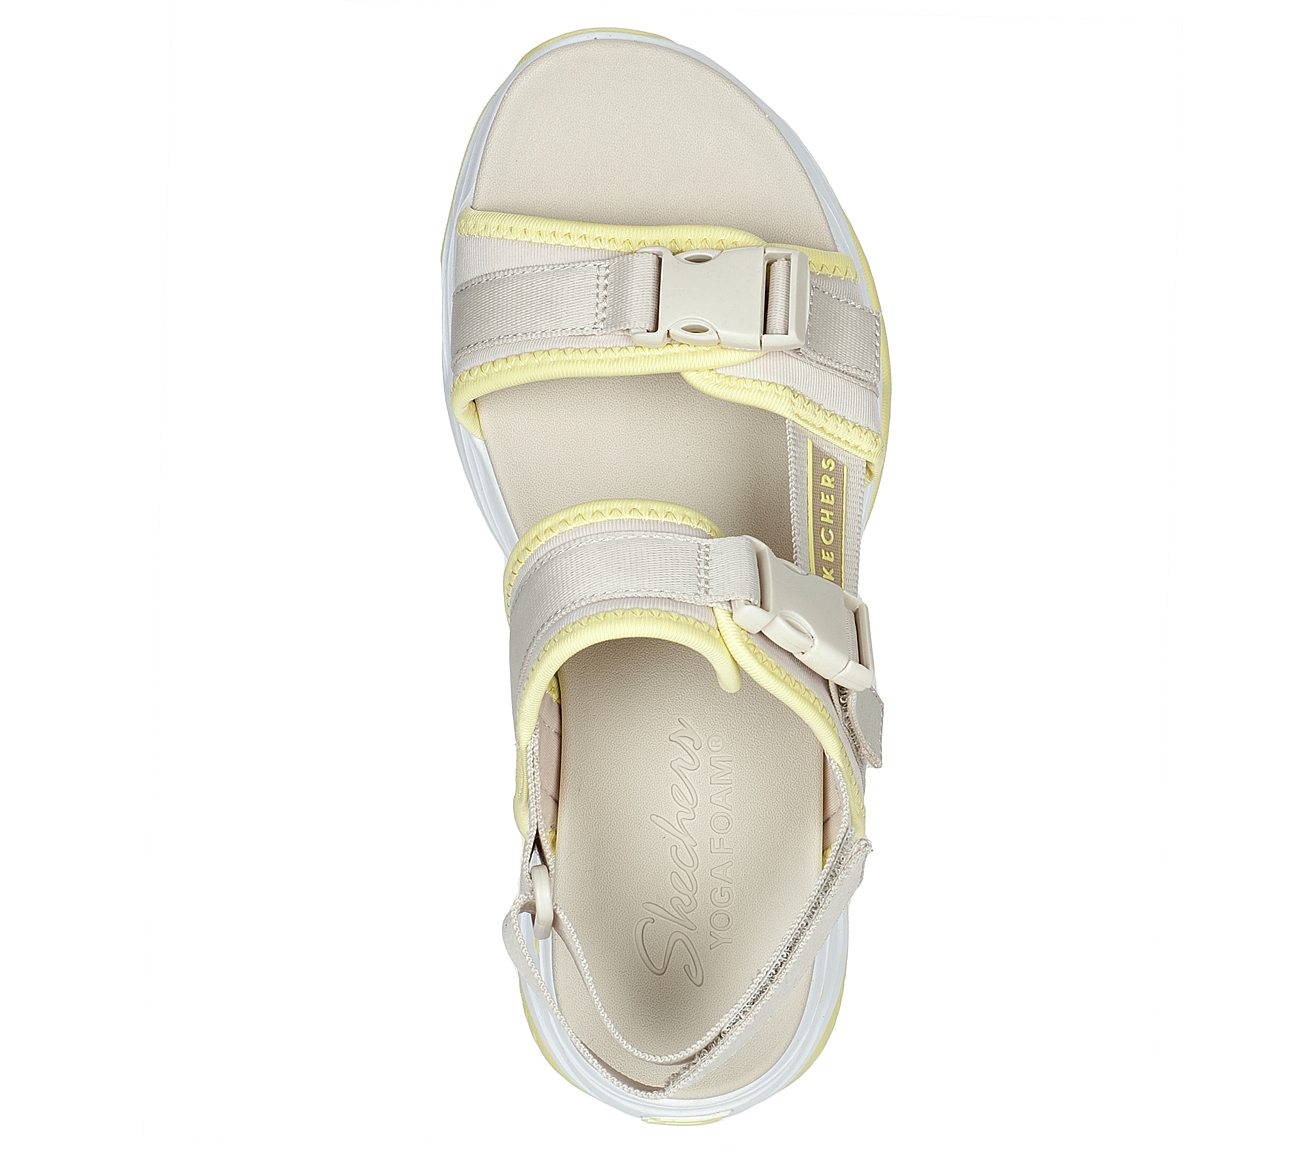 D'LITES 4.0 - PLANET HOUR, NATURAL/YELLOW Footwear Top View